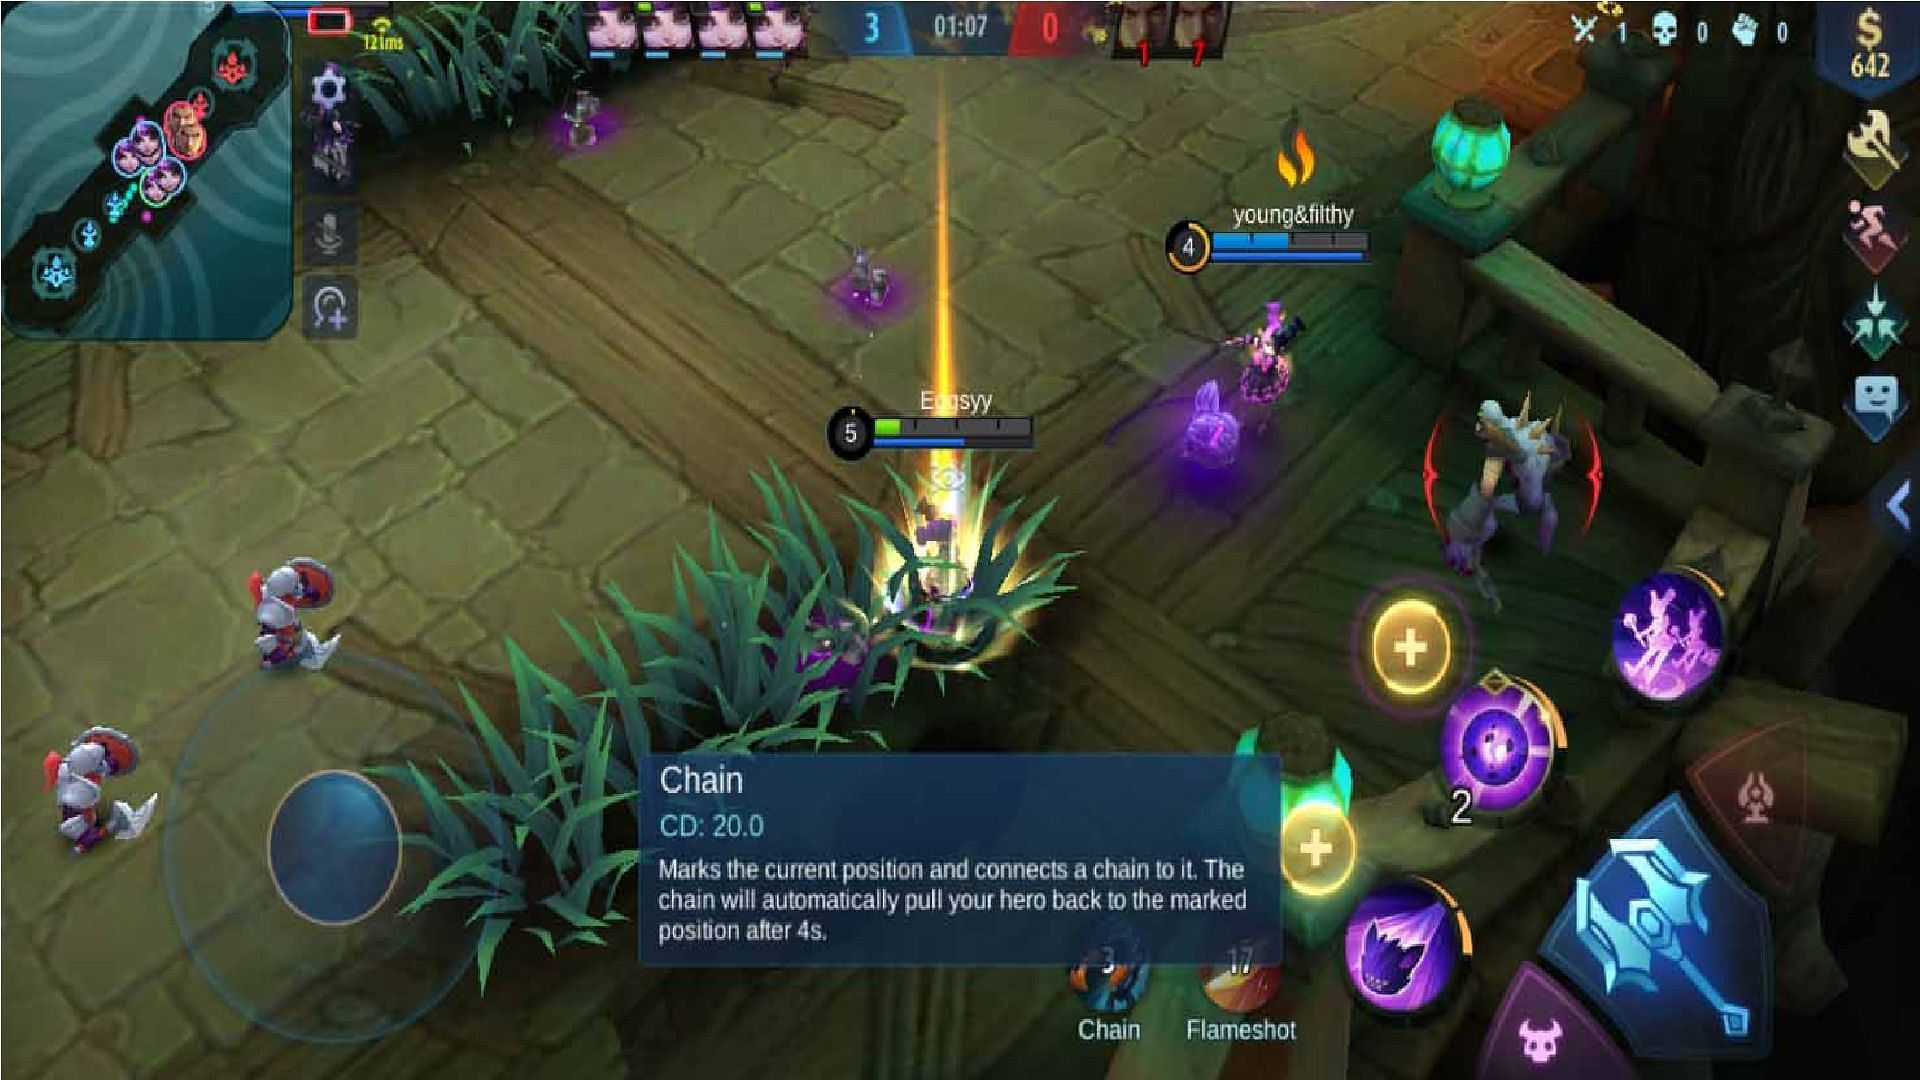 Check out the tips to win more in this new arcade game in Mobile Legends Bang Bang (Image via Moonton Games)